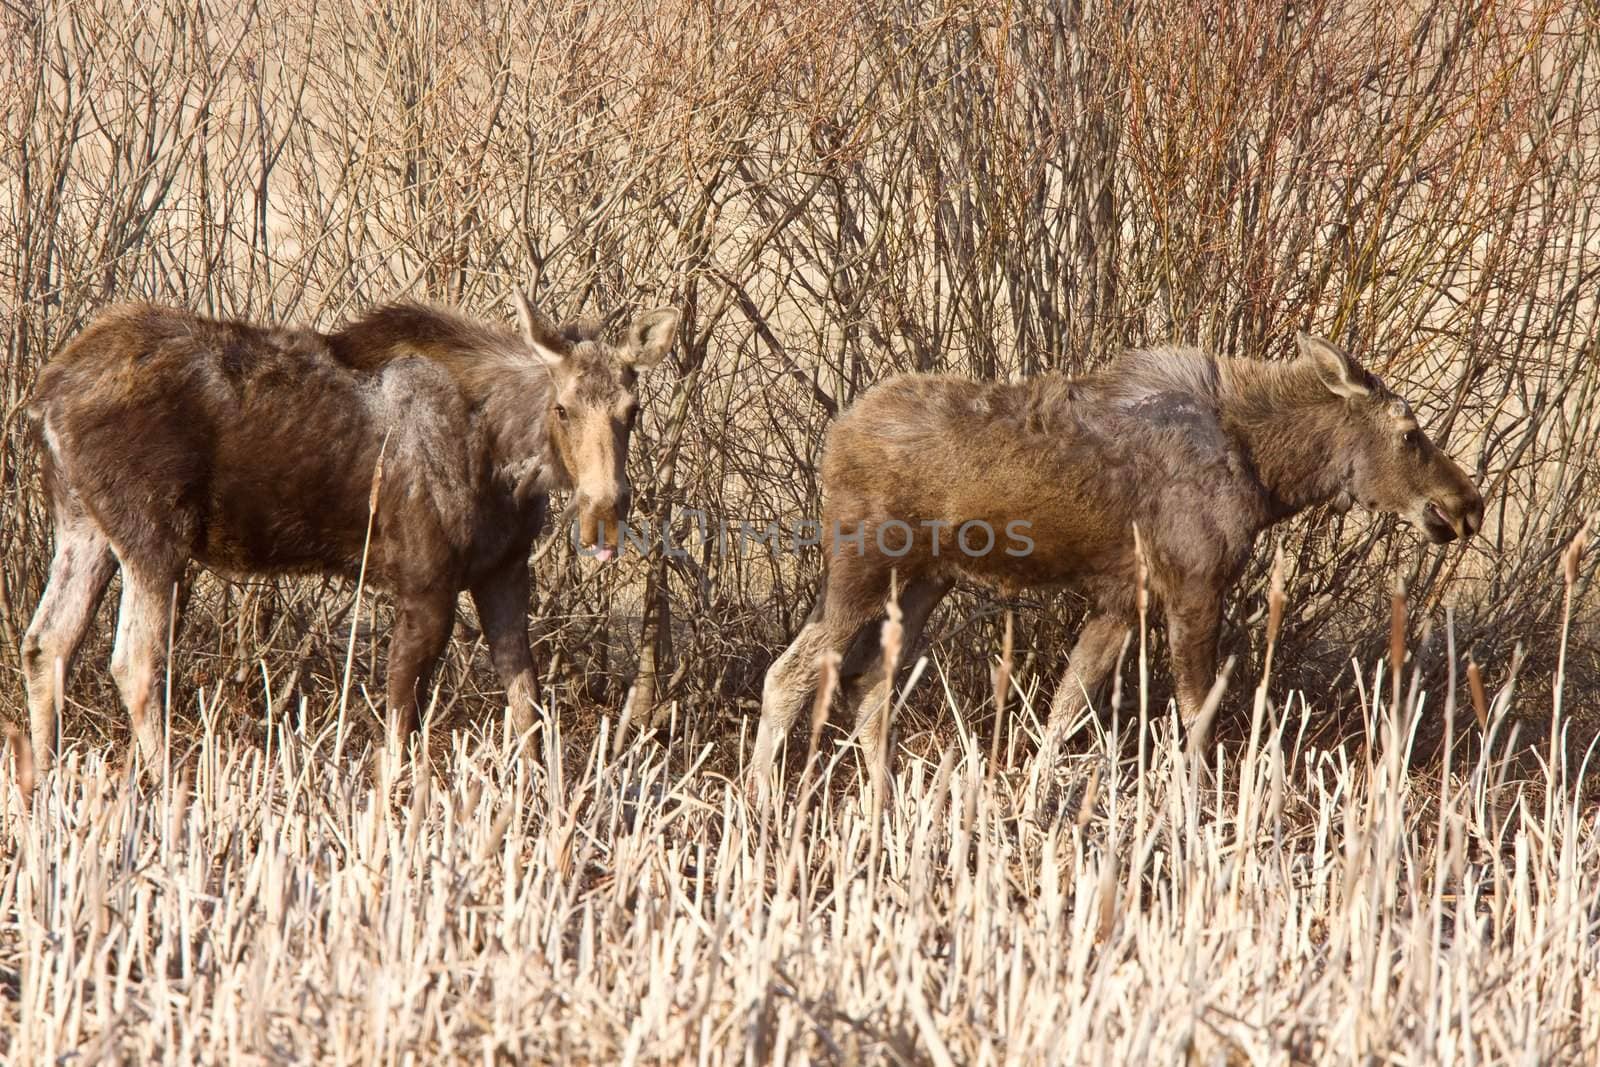 Moose Cow and Calf Saskatchewan Canada by pictureguy